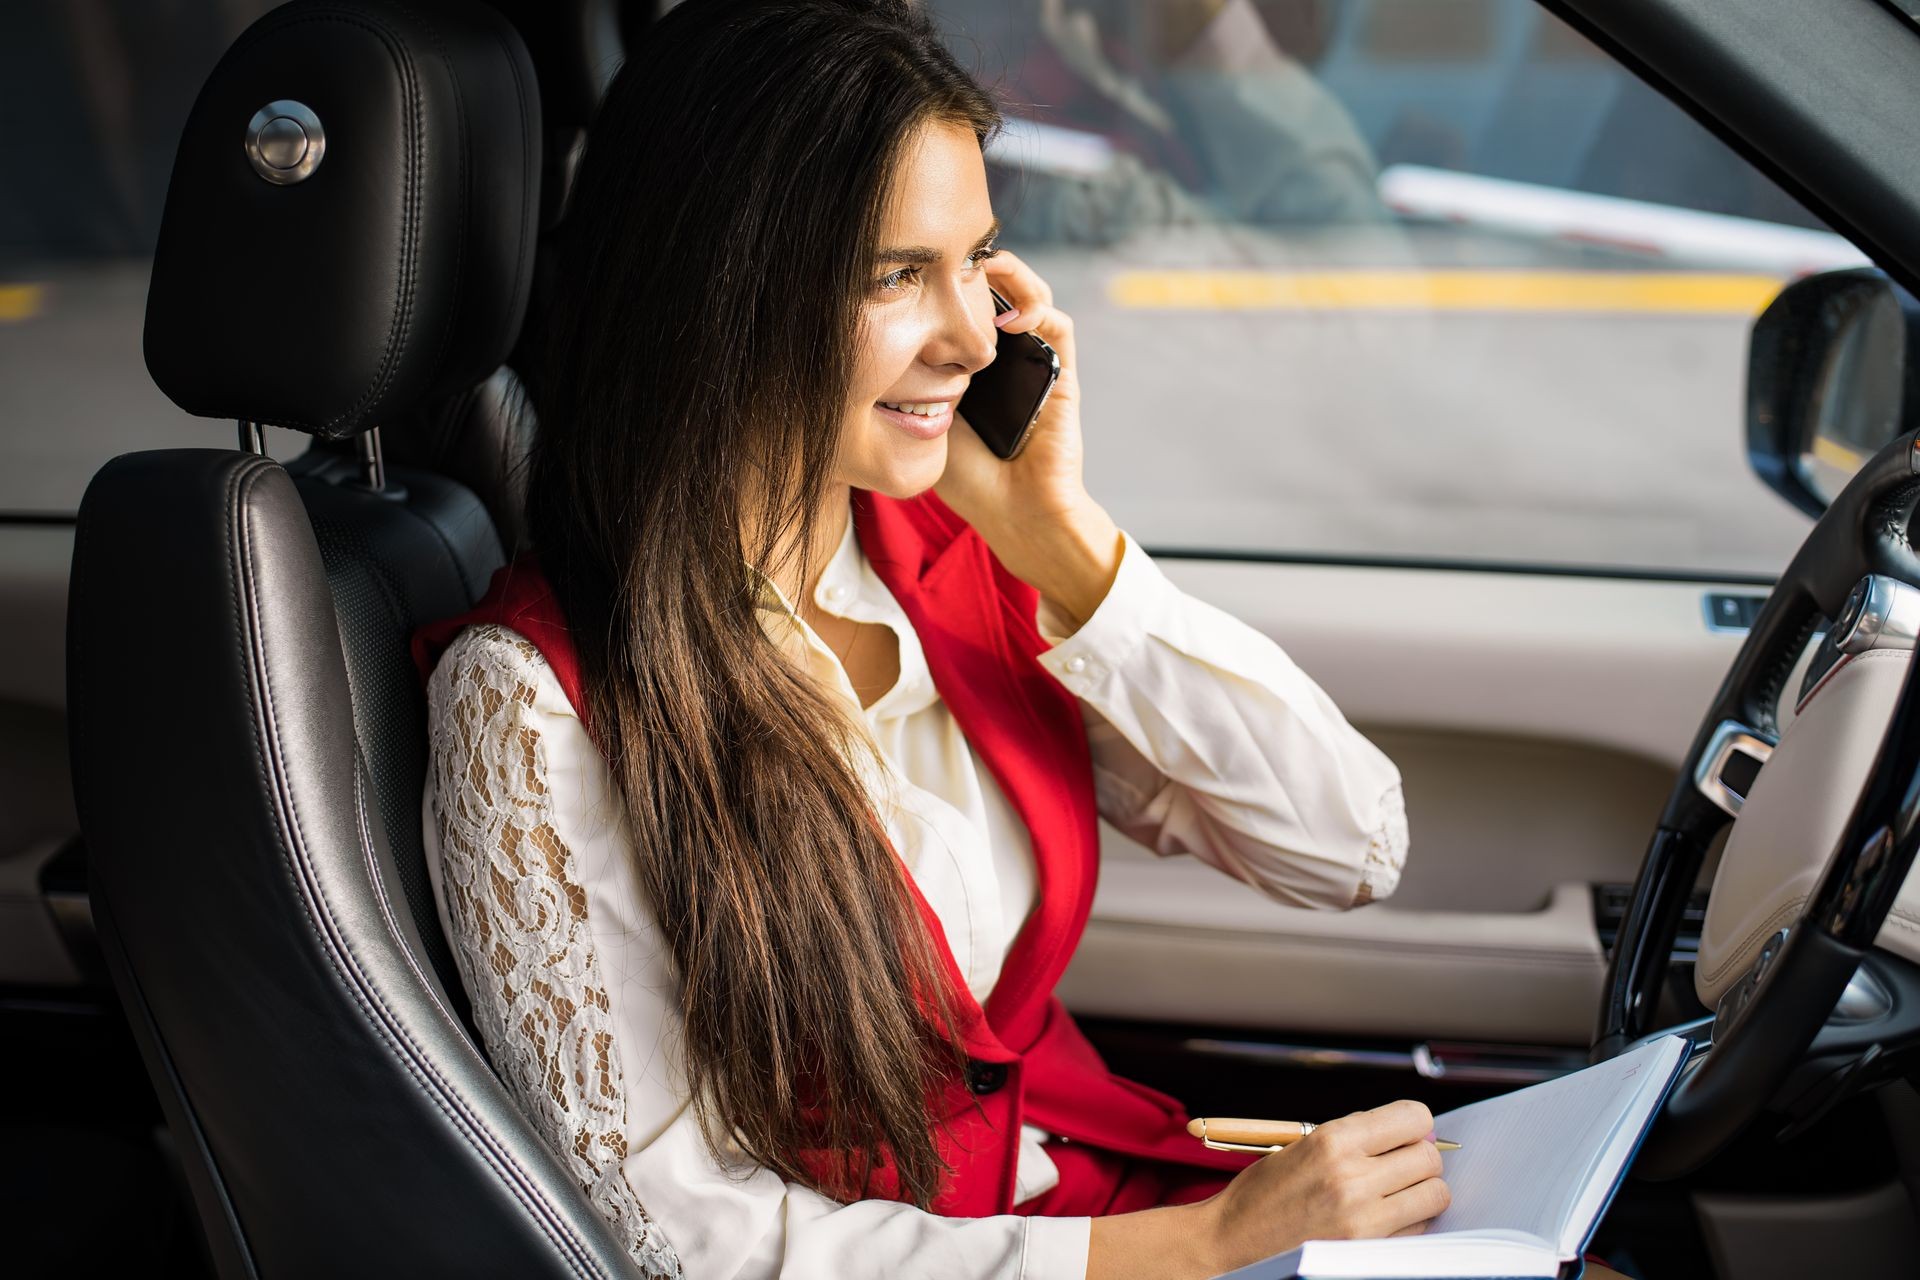 Smiling woman skilled entrepreneur having pleasant smartphone conversation and using textbook for notary, sitting in luxury automobile during break at job. Cheerful female executive director phone 